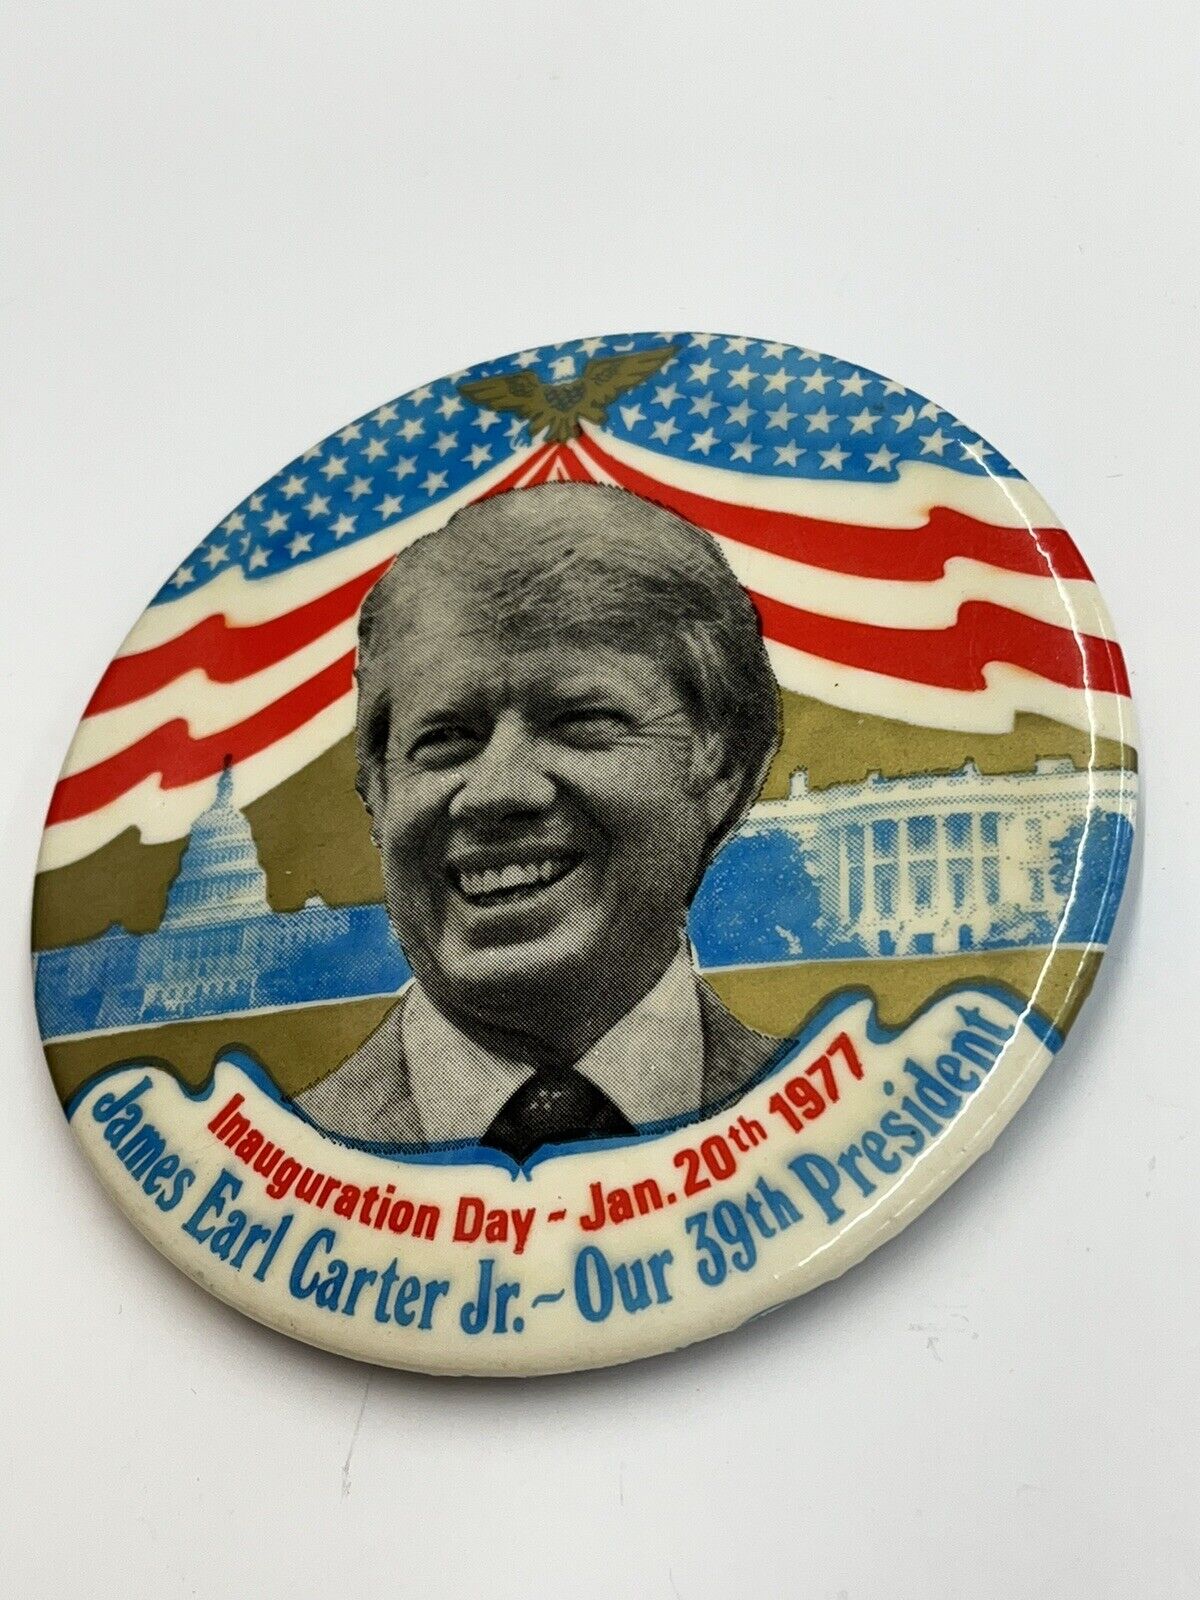 JAN. 20, 1977 JAMES EARL CARTER JR. 39TH PRESIDENT INAUGURATION DAY 6” BUTTON